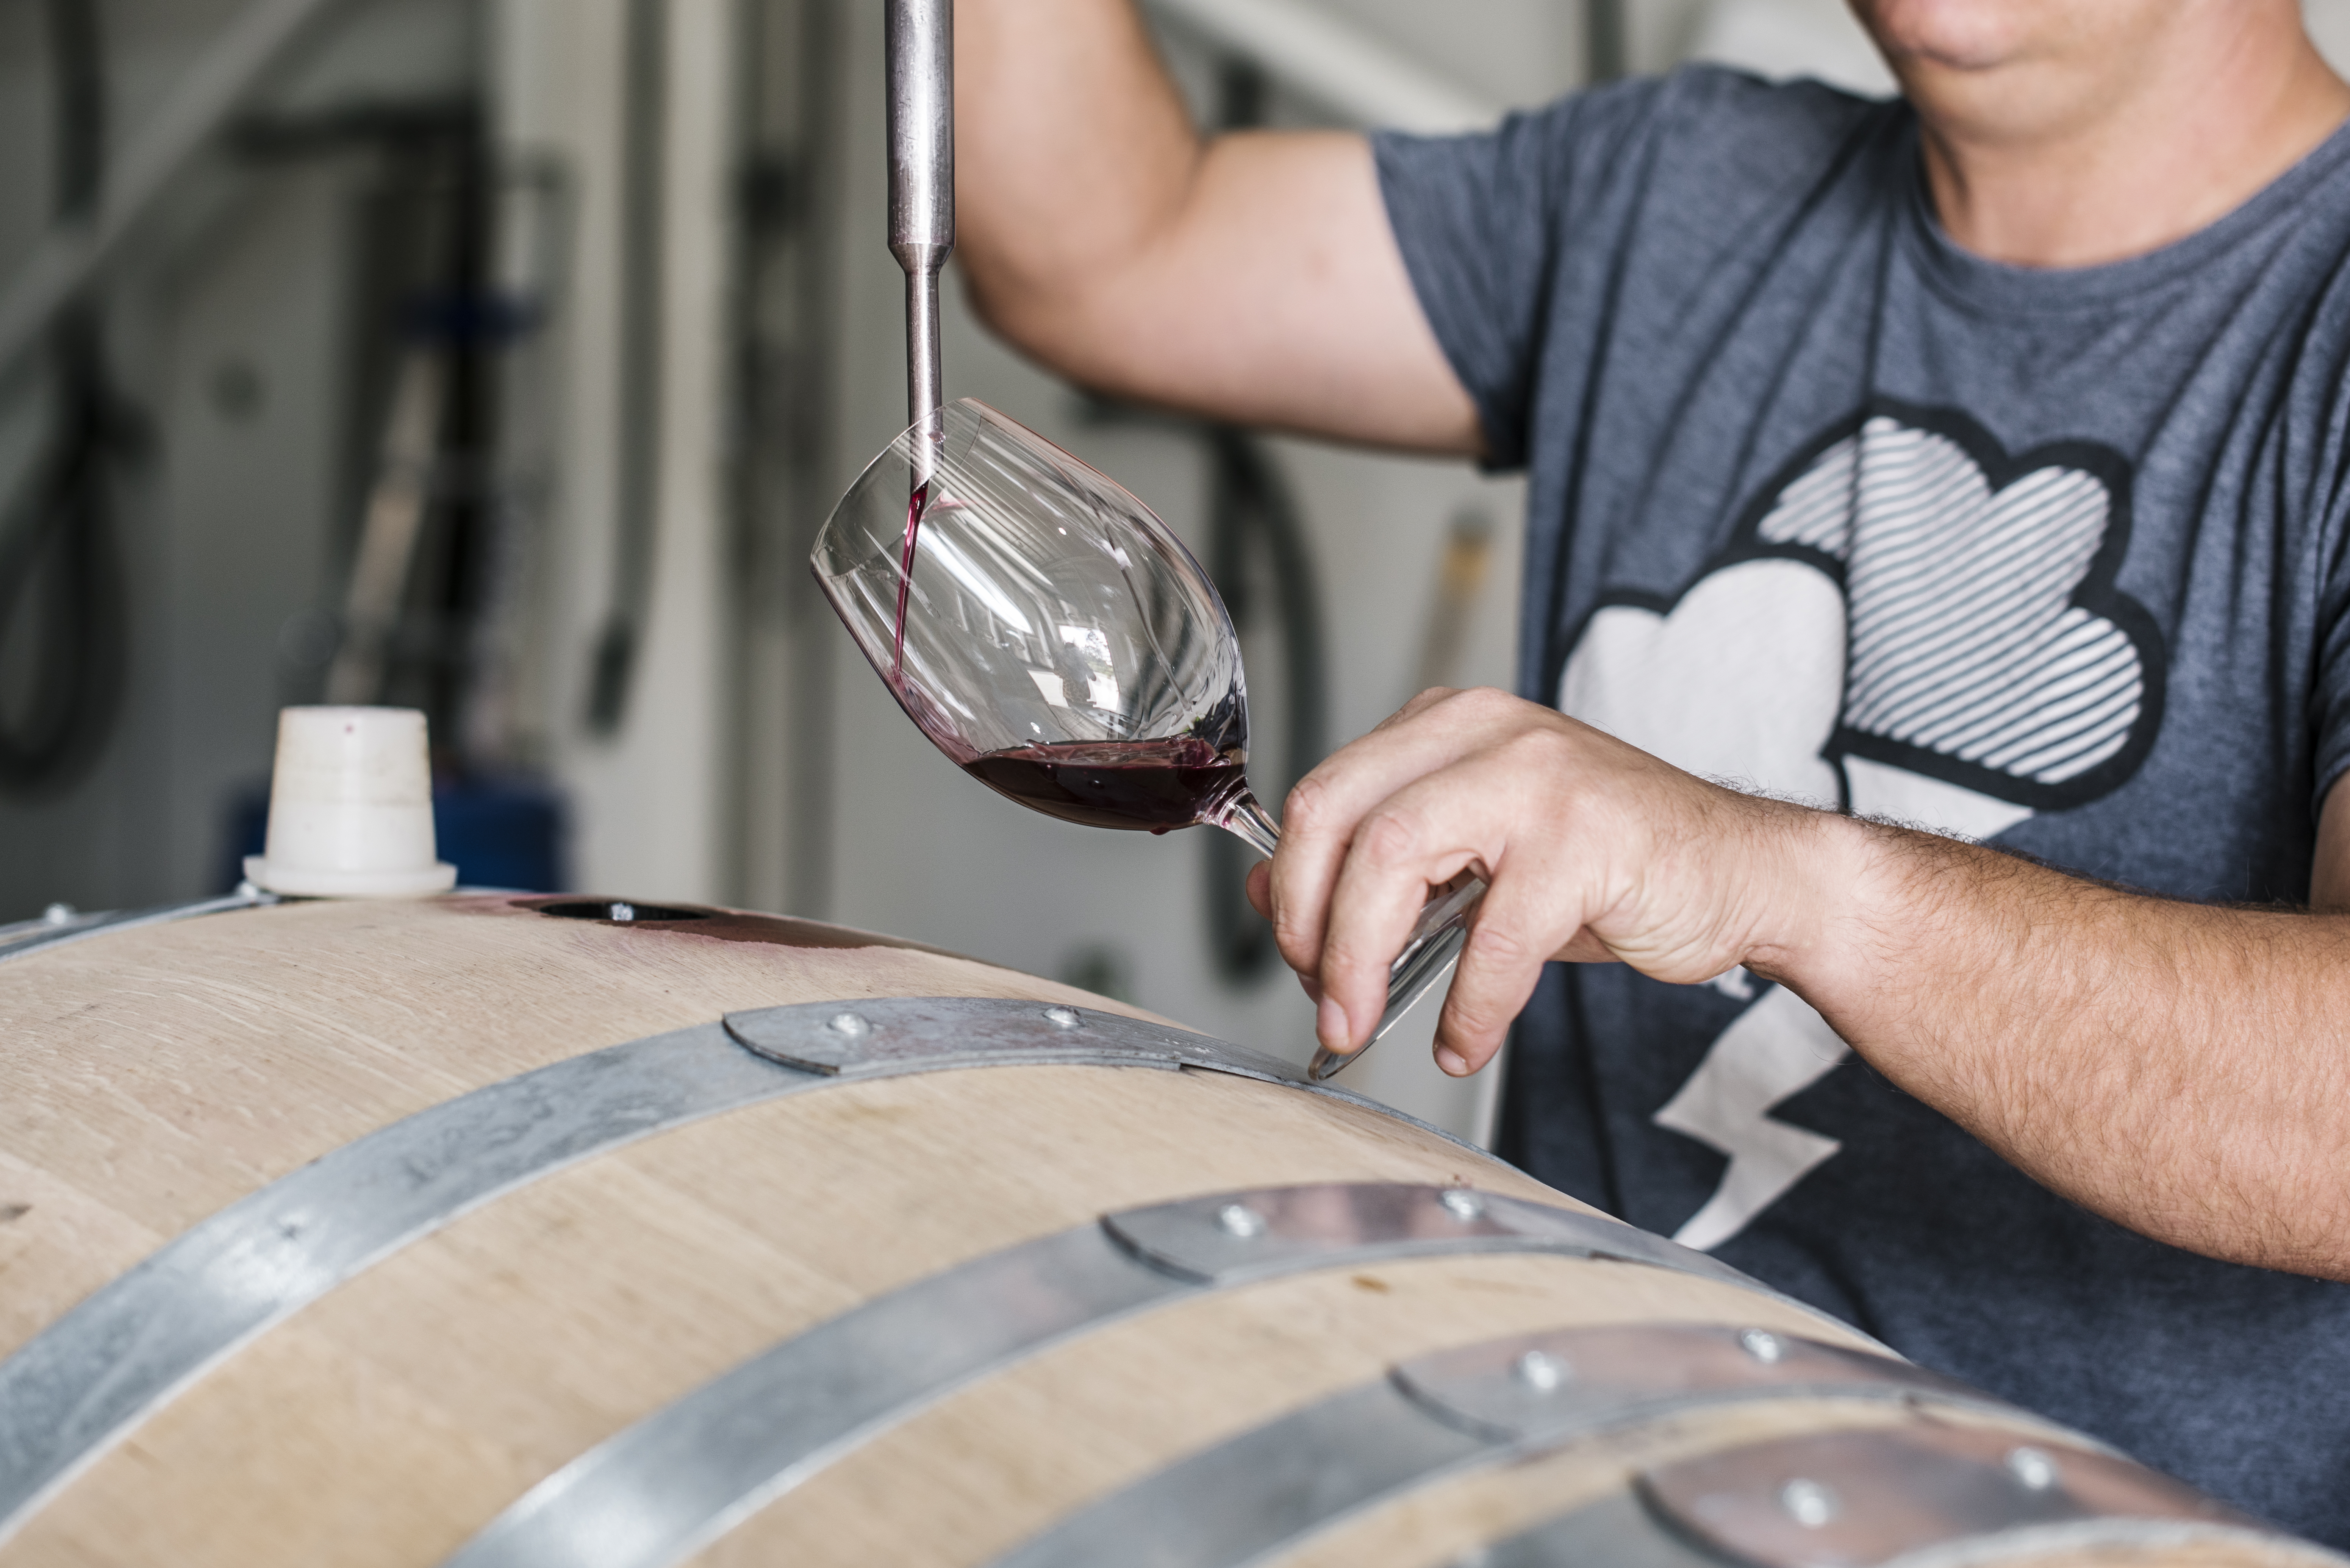 Explore our working winery with the DeWine experience!